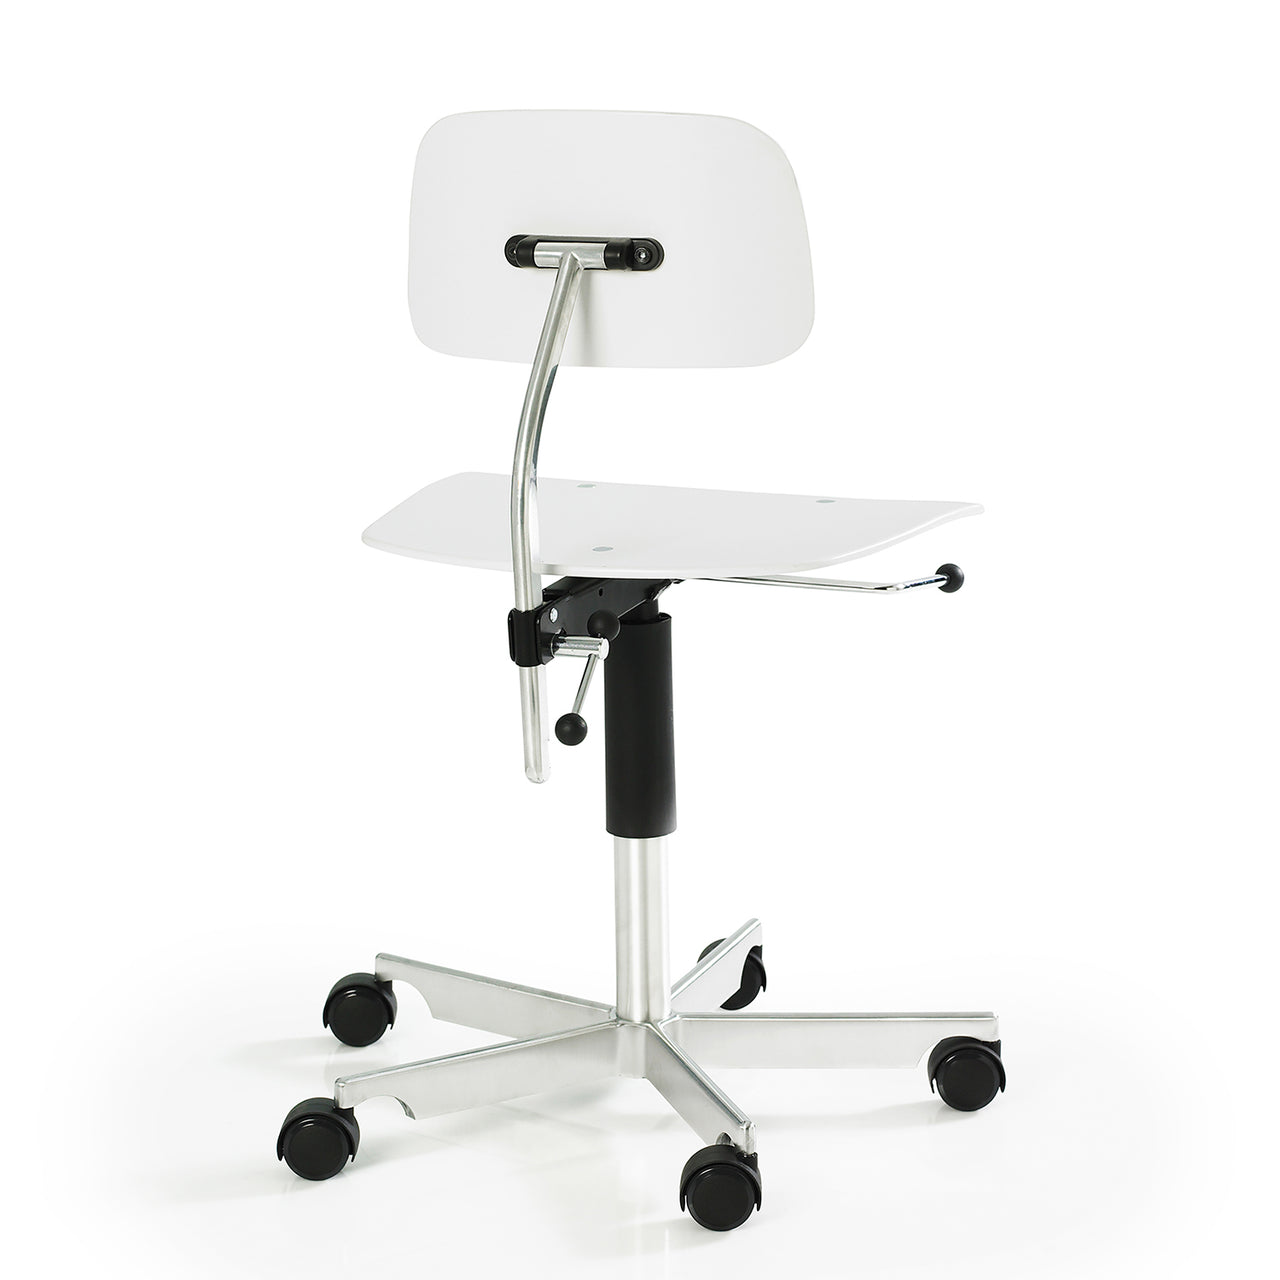 Kevi Chair 2533: Wood + White Lacquer